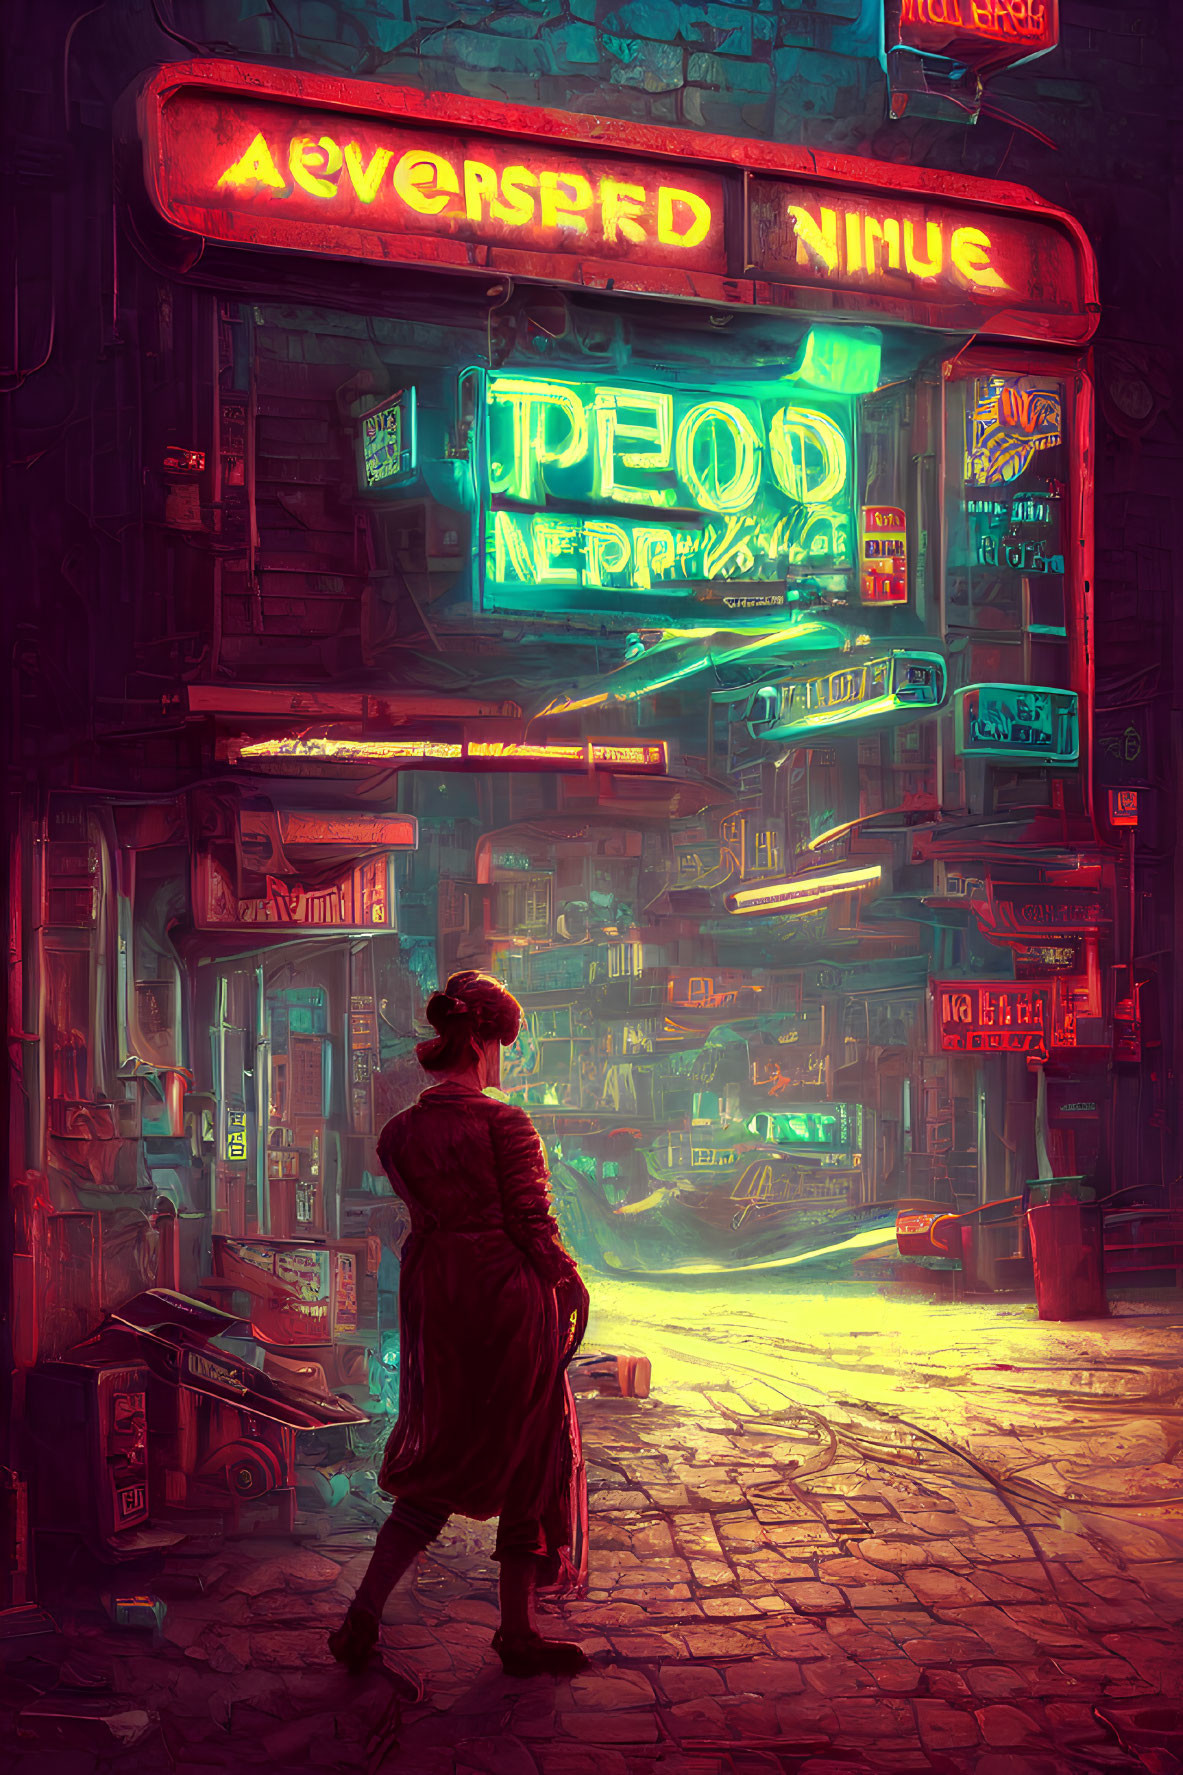 Neon-lit futuristic alley with vibrant signs and dystopian ambiance